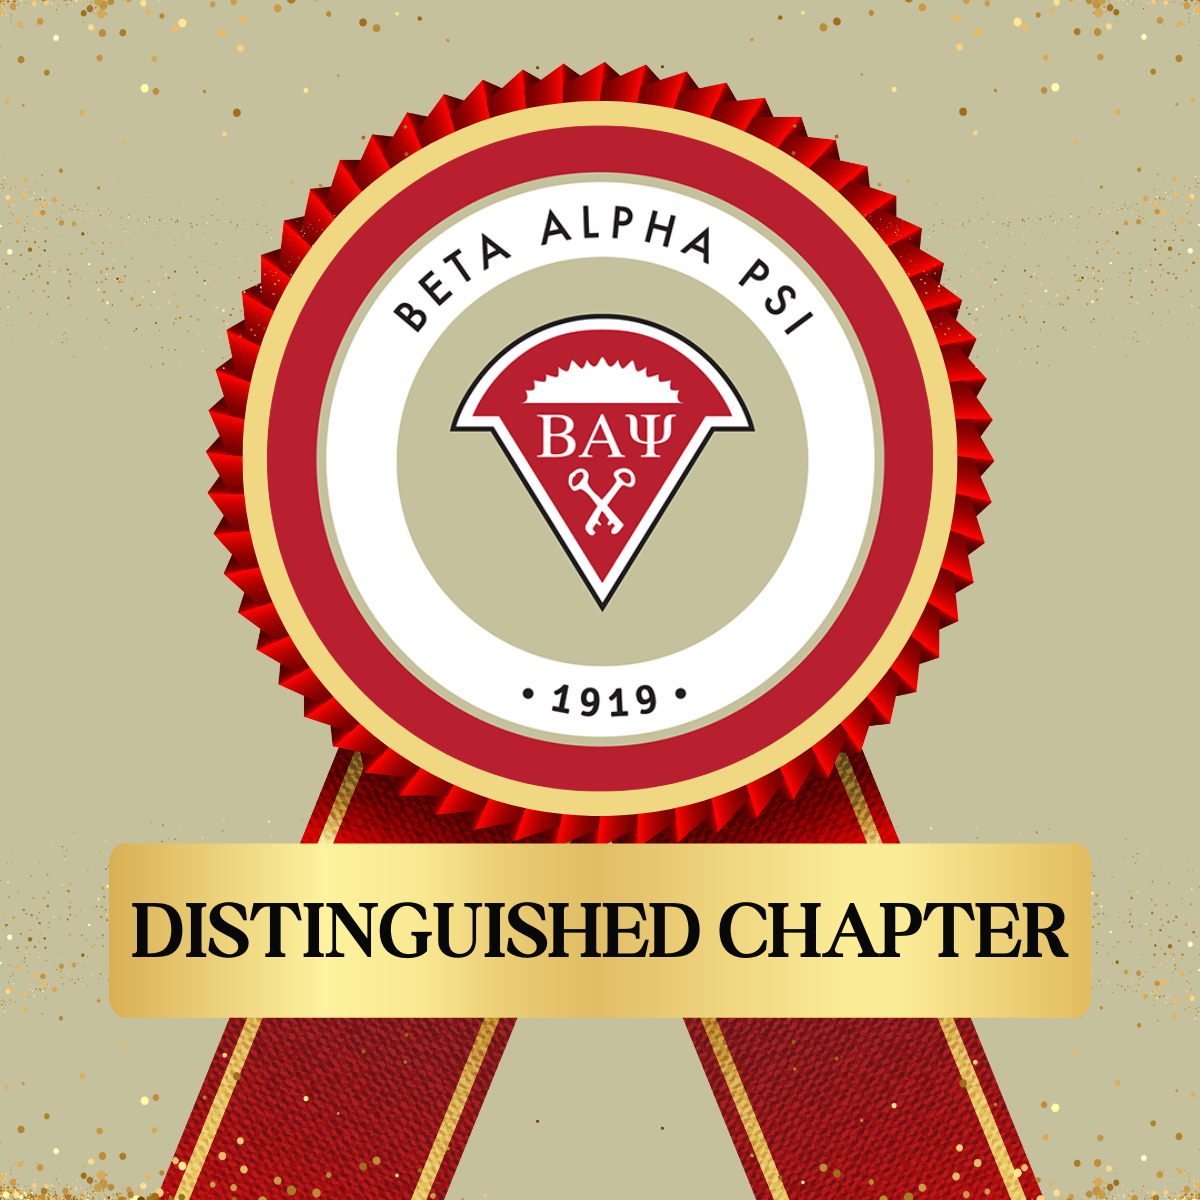 Displays an image of a ribbon with the Beta Alpha Psi logo and text that reads "Distinguished Chapter"